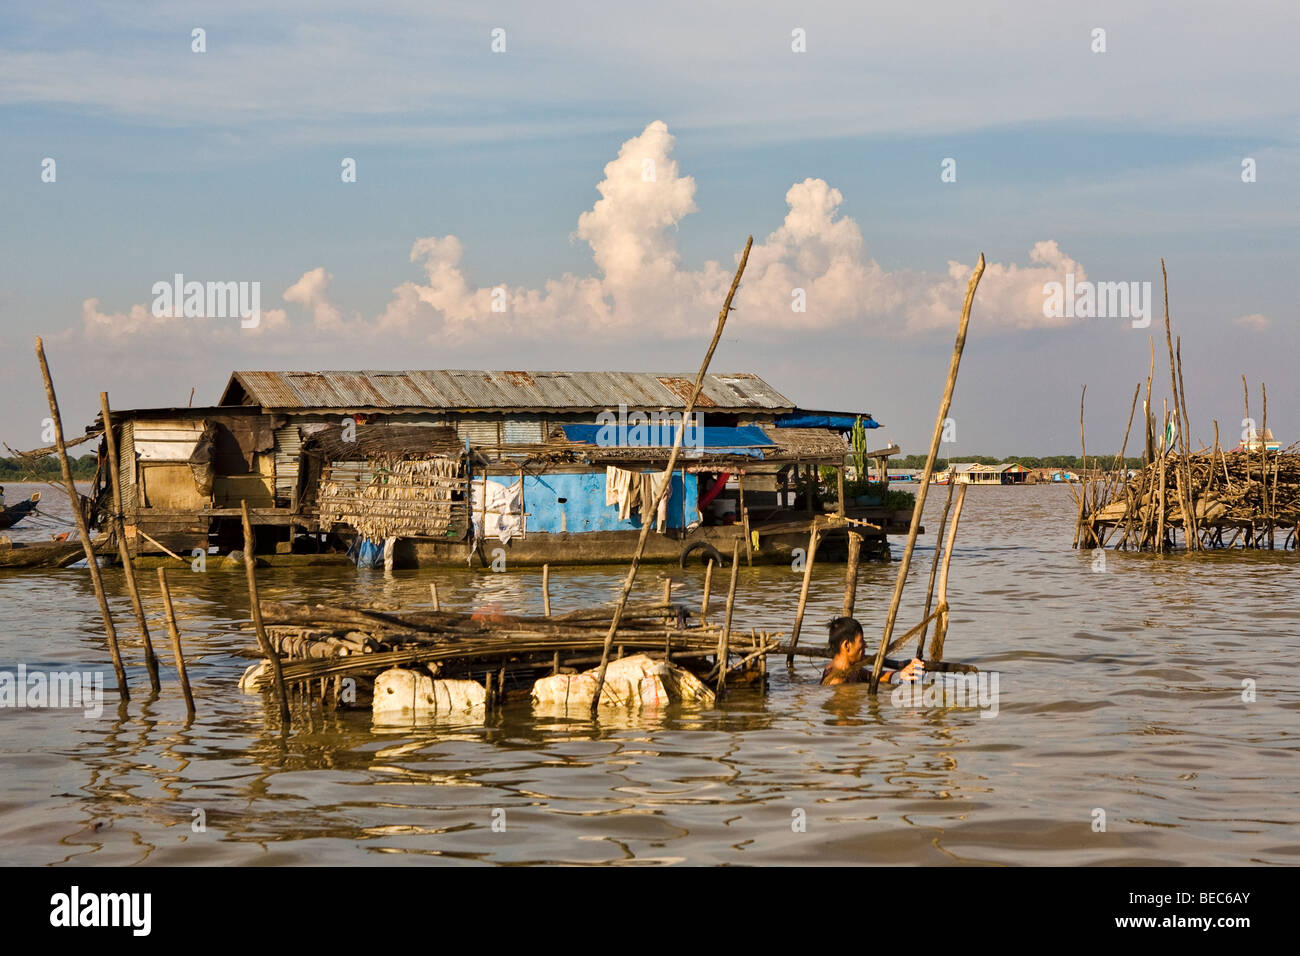 A floating house on Tong Le Sap Lake in Cambodia Stock Photo